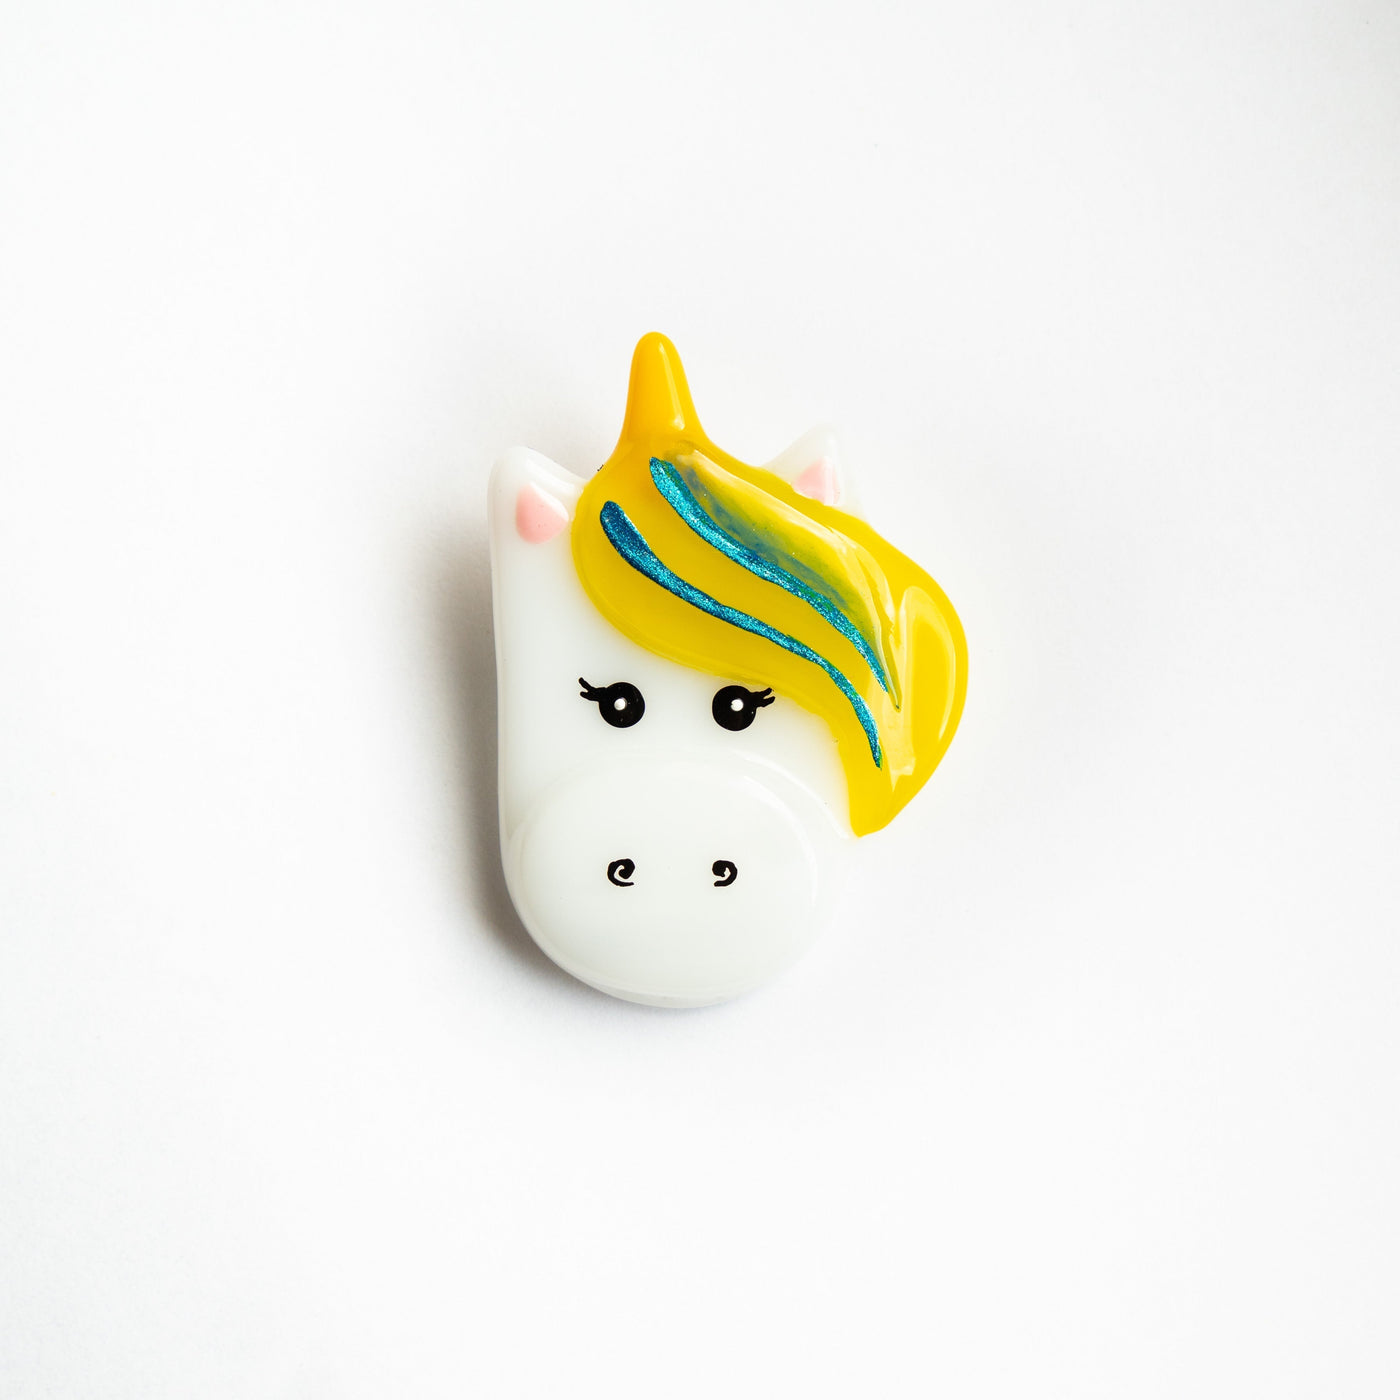 Fused stained glass white unicorn with yellow mane brooch